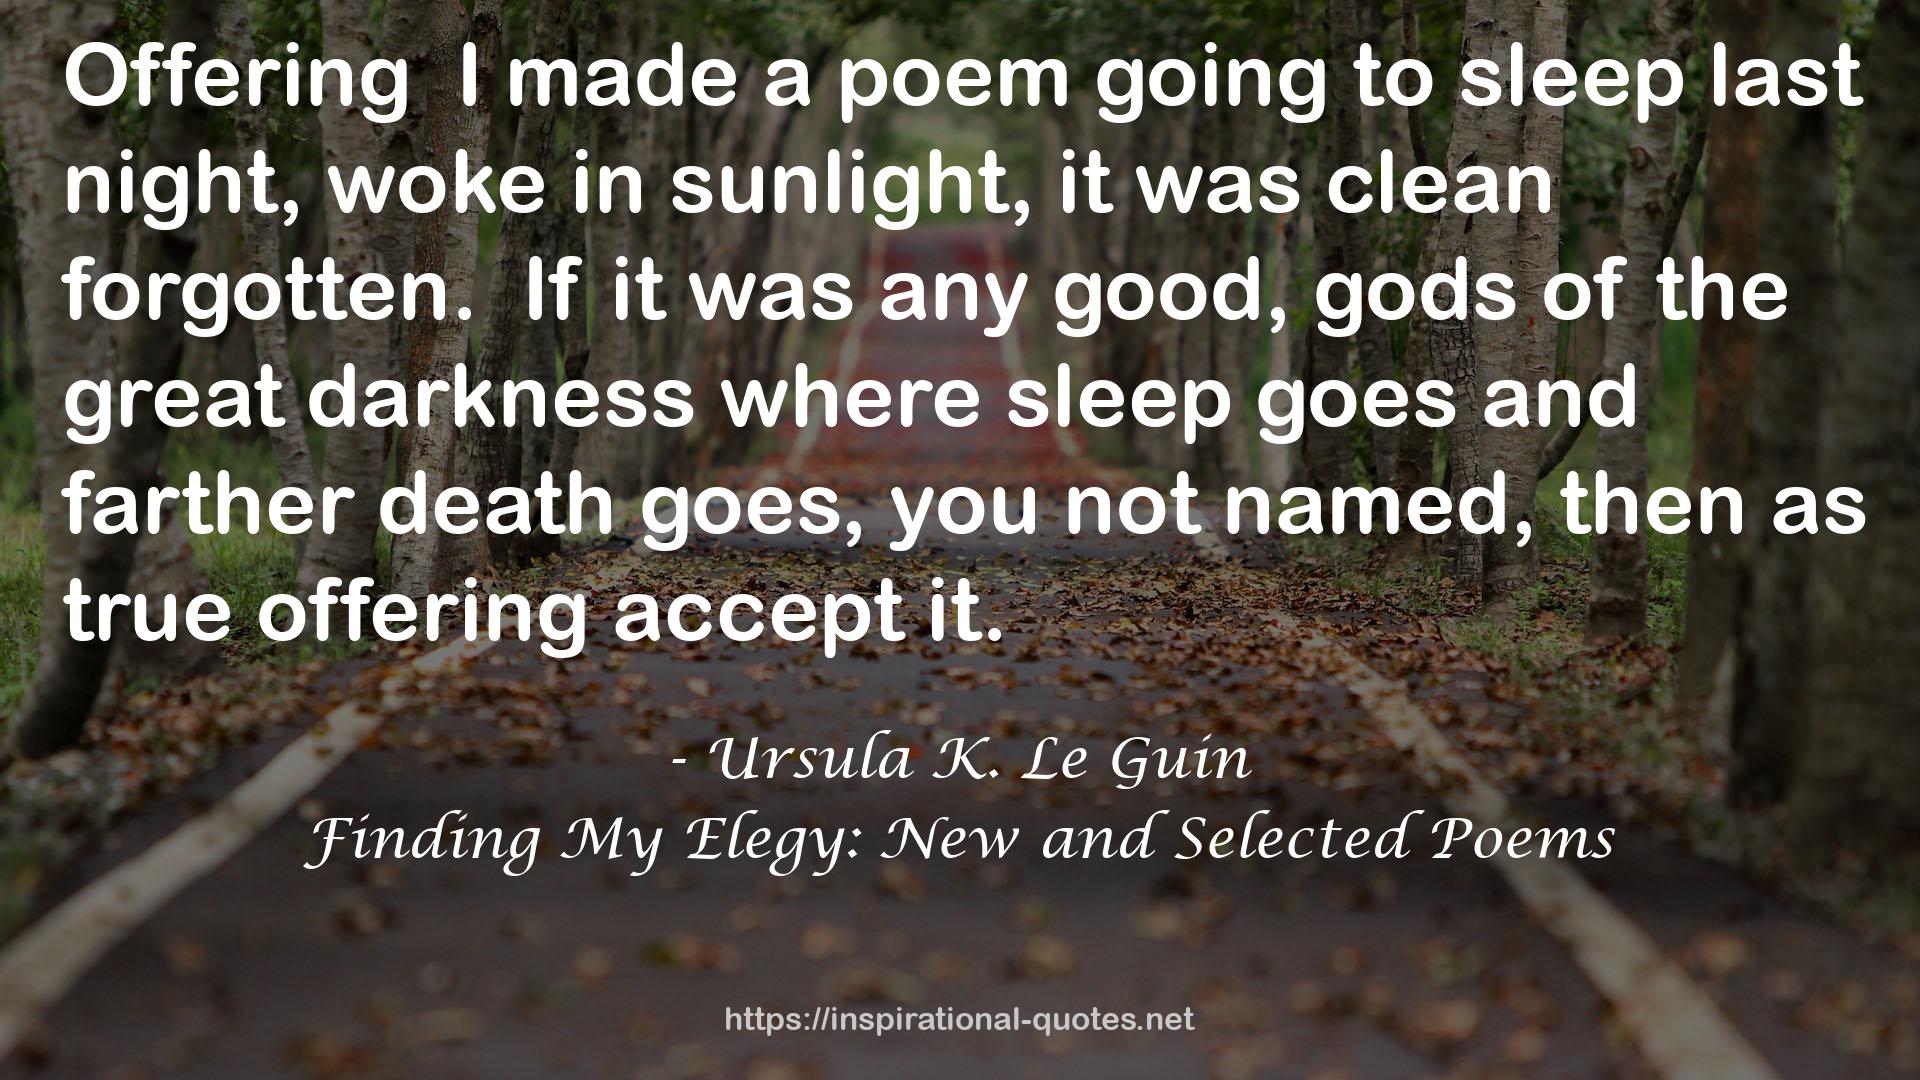 Finding My Elegy: New and Selected Poems QUOTES